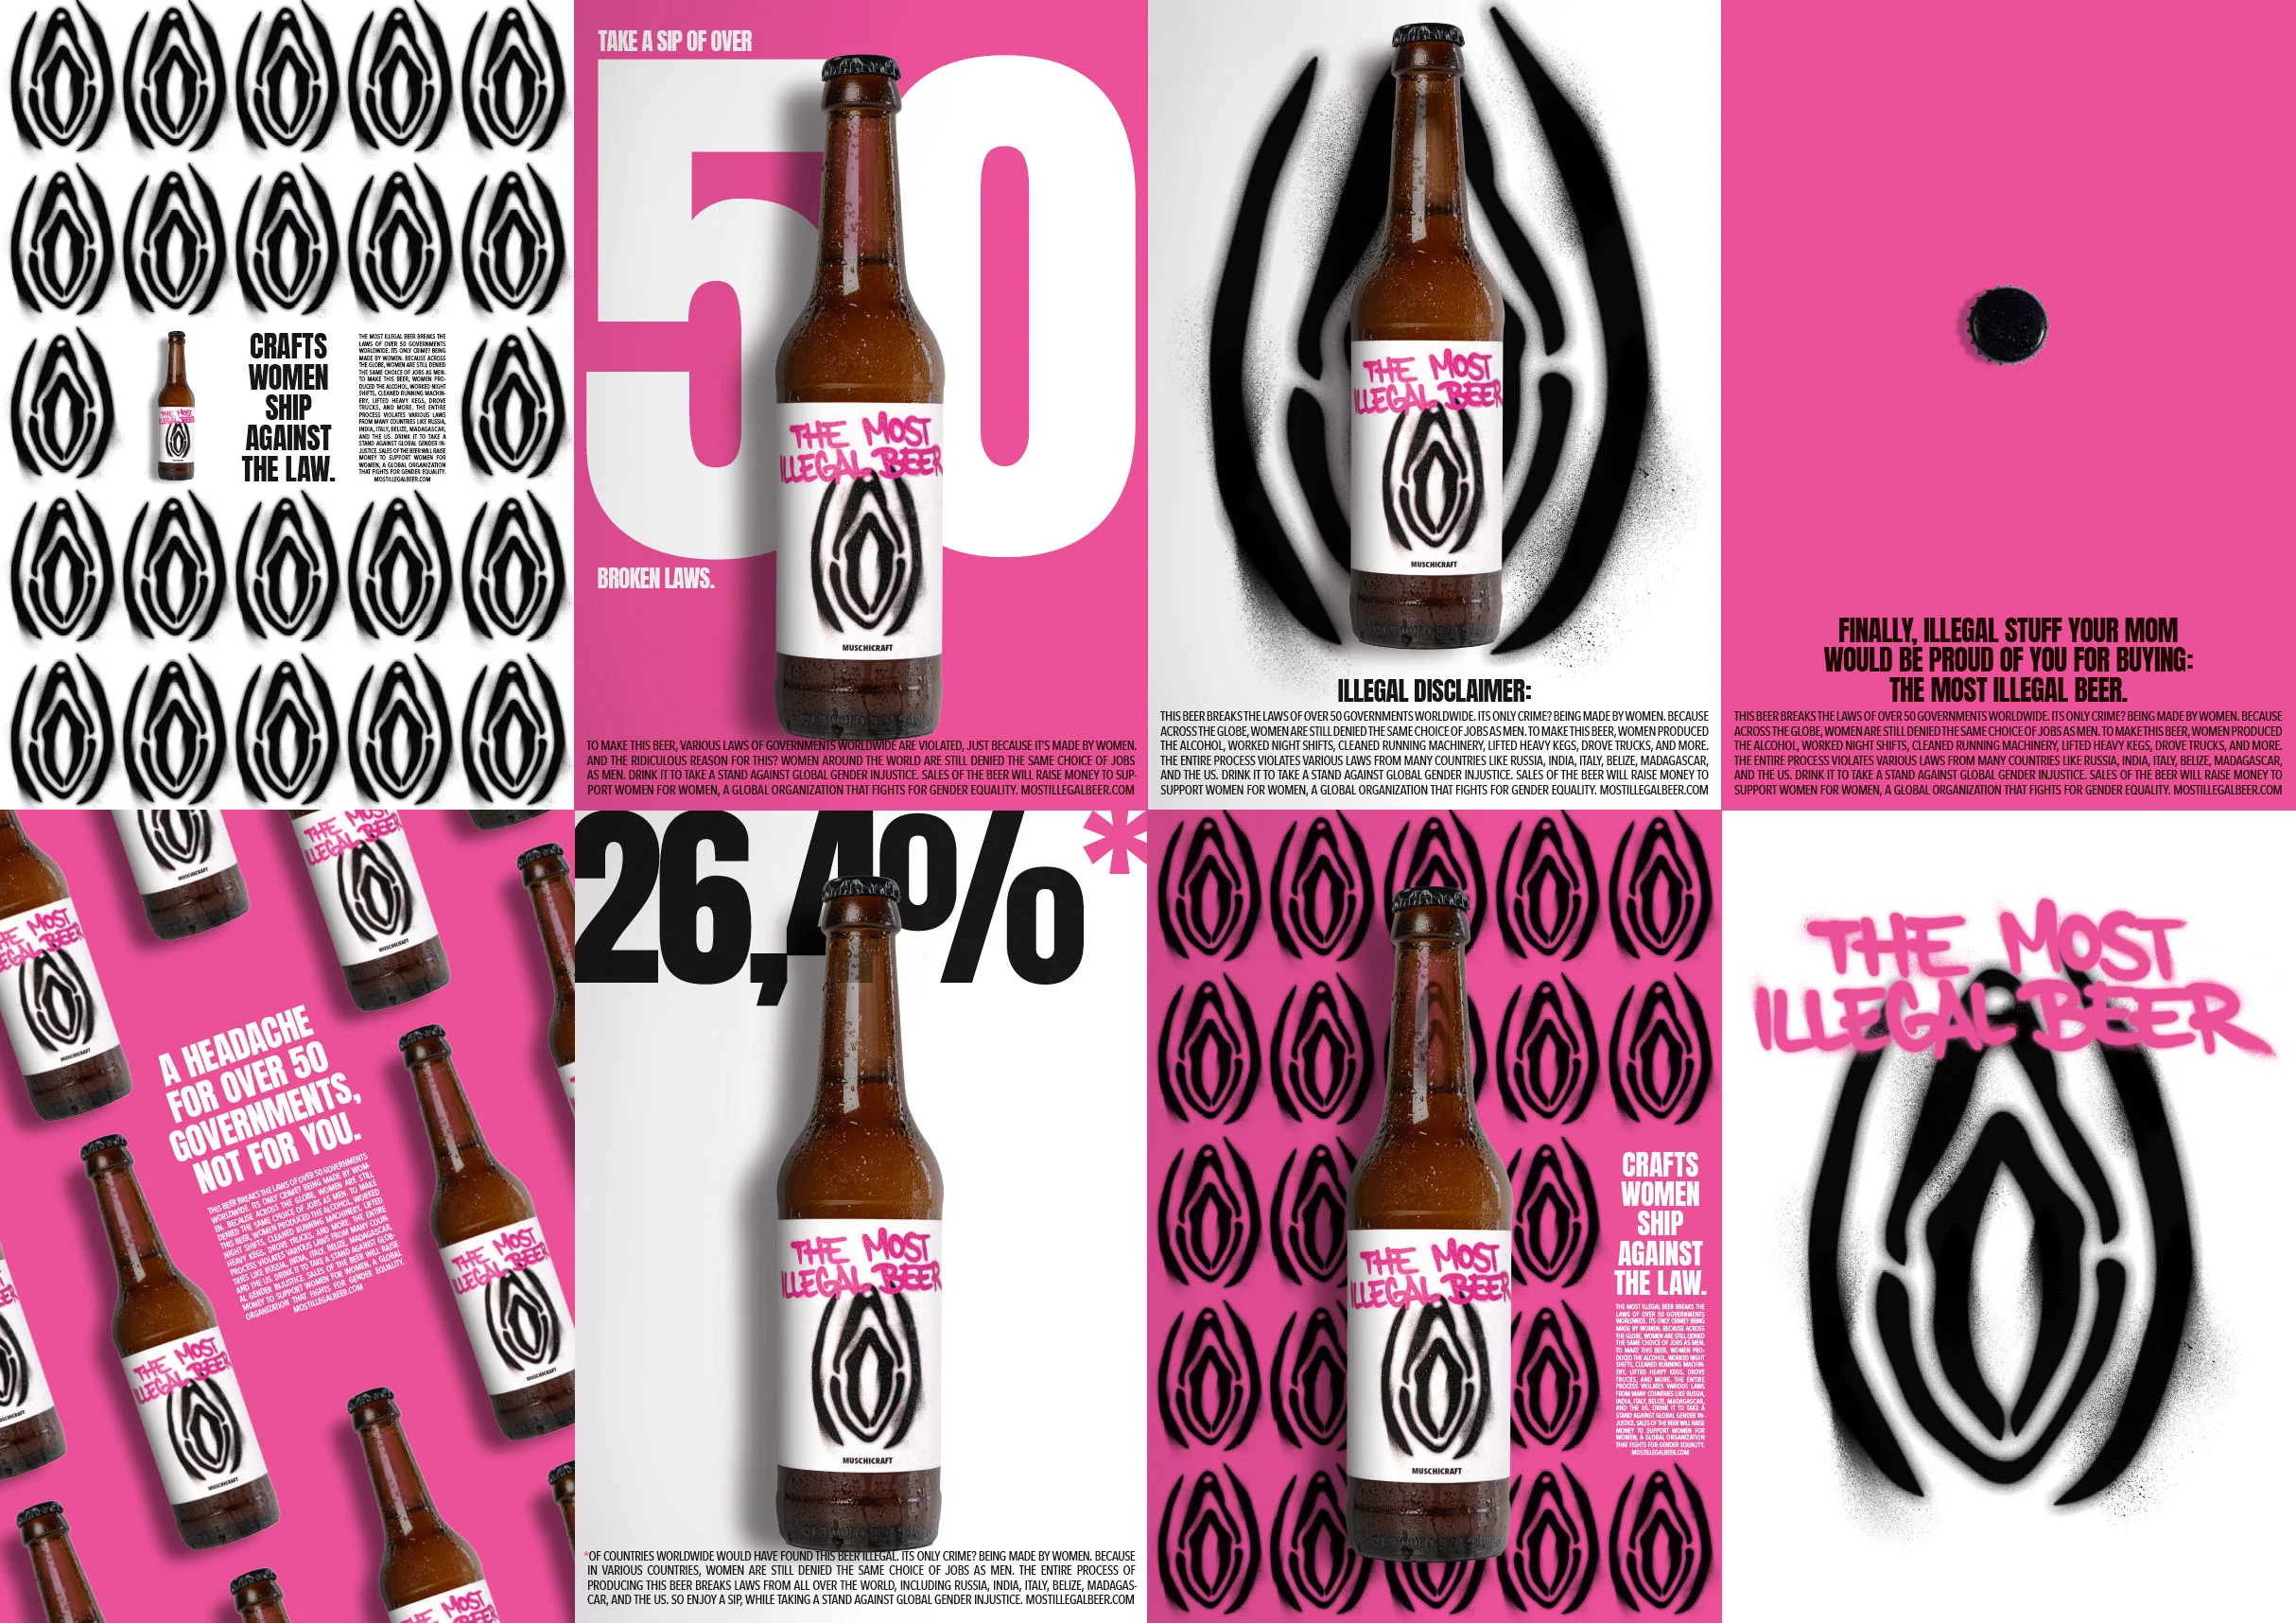 The Most Illegal Beer montage of posters